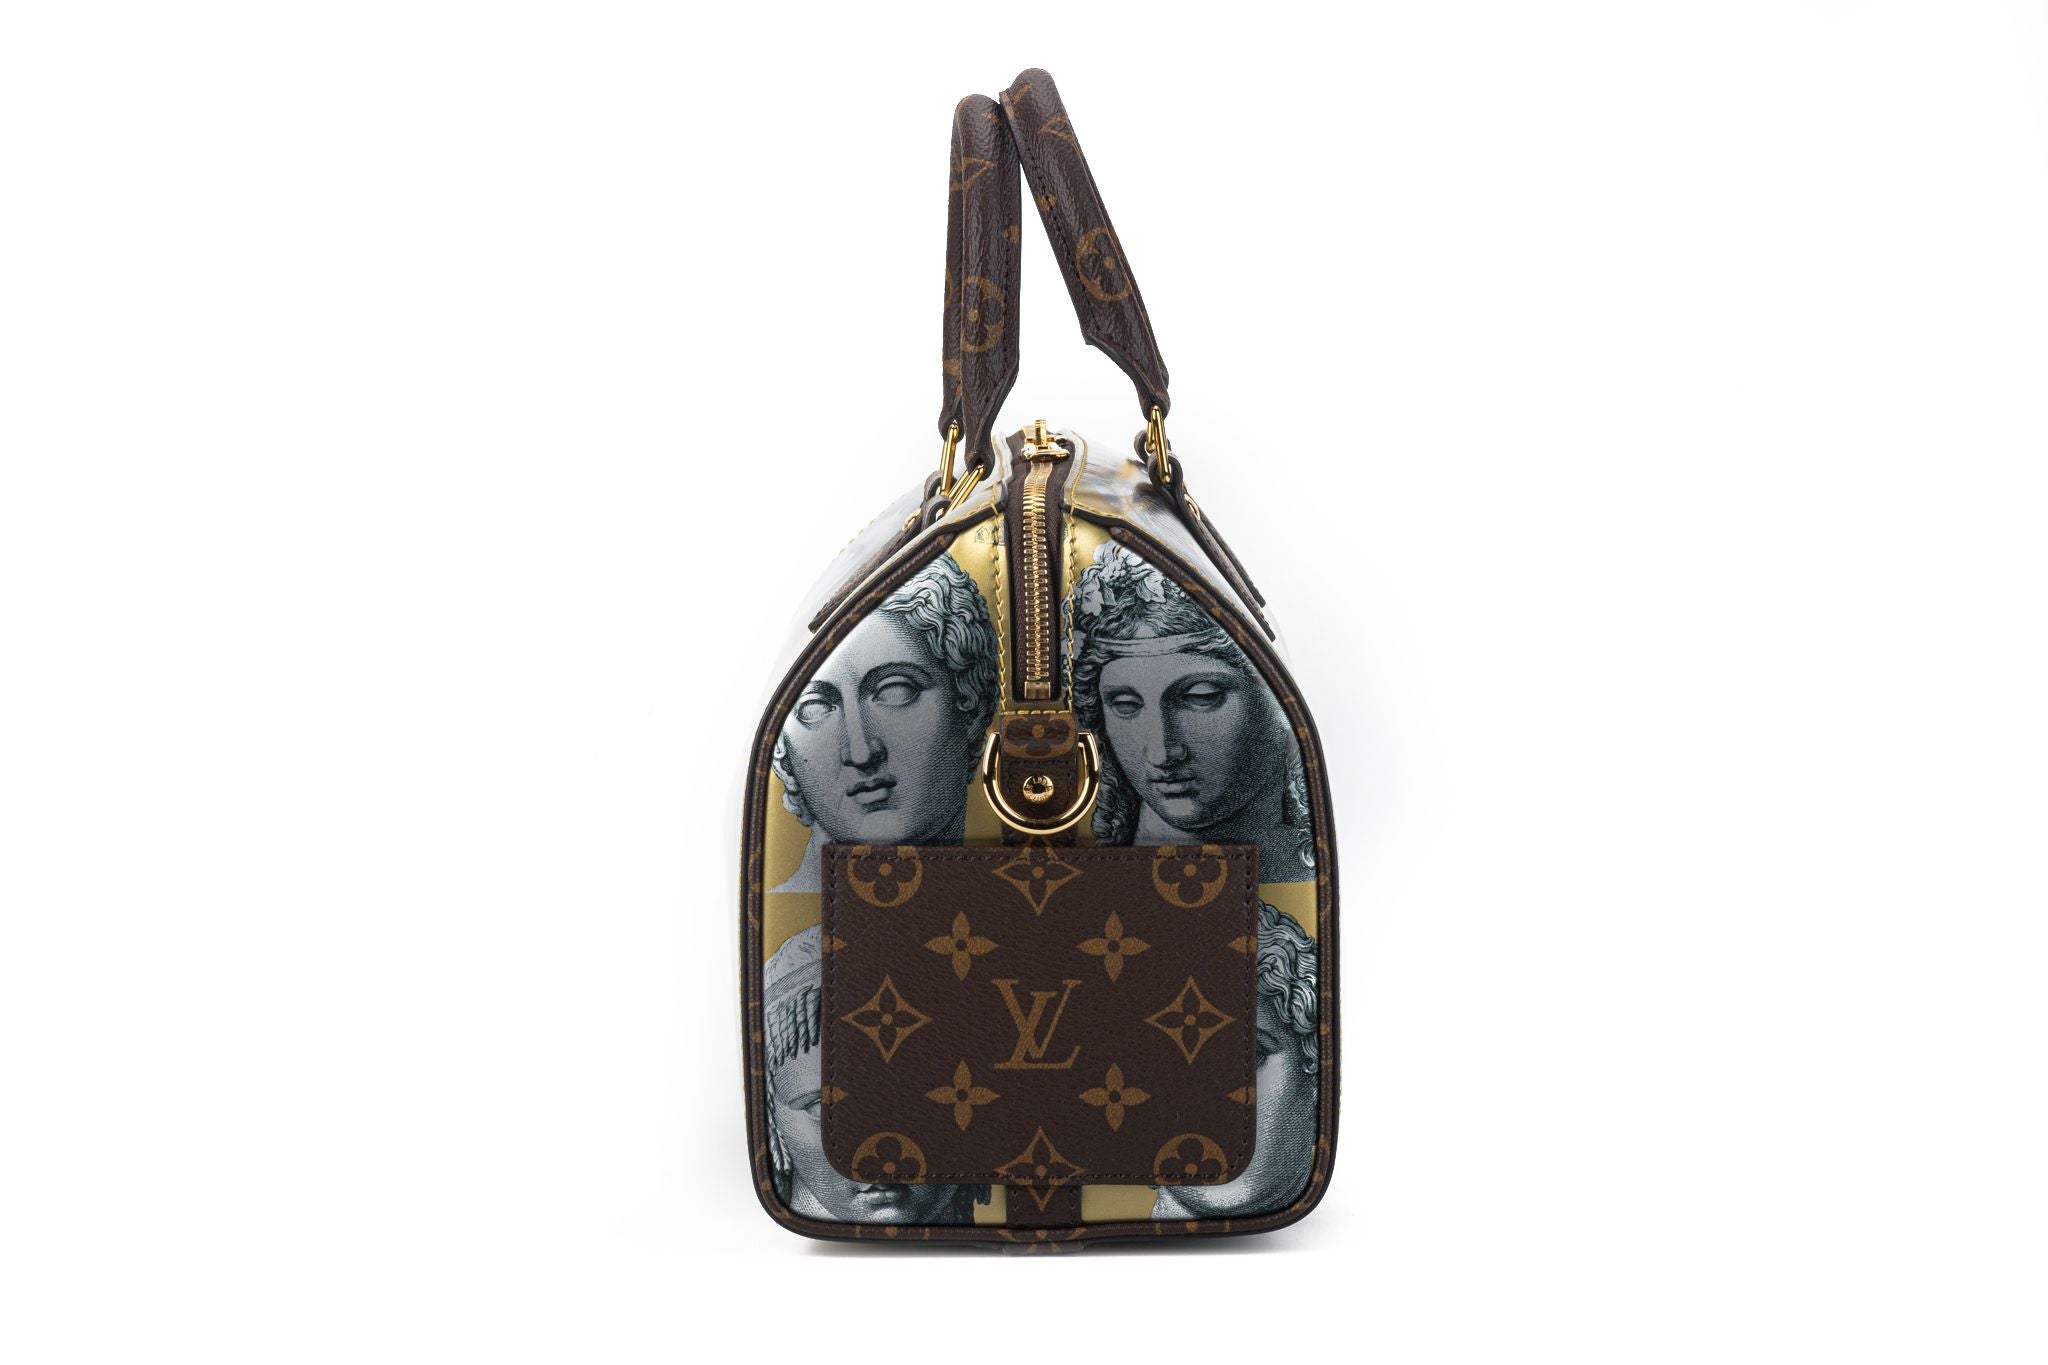 New Louis Vuitton Fornasetti Speedy 25 Bandouliere Bag with Box